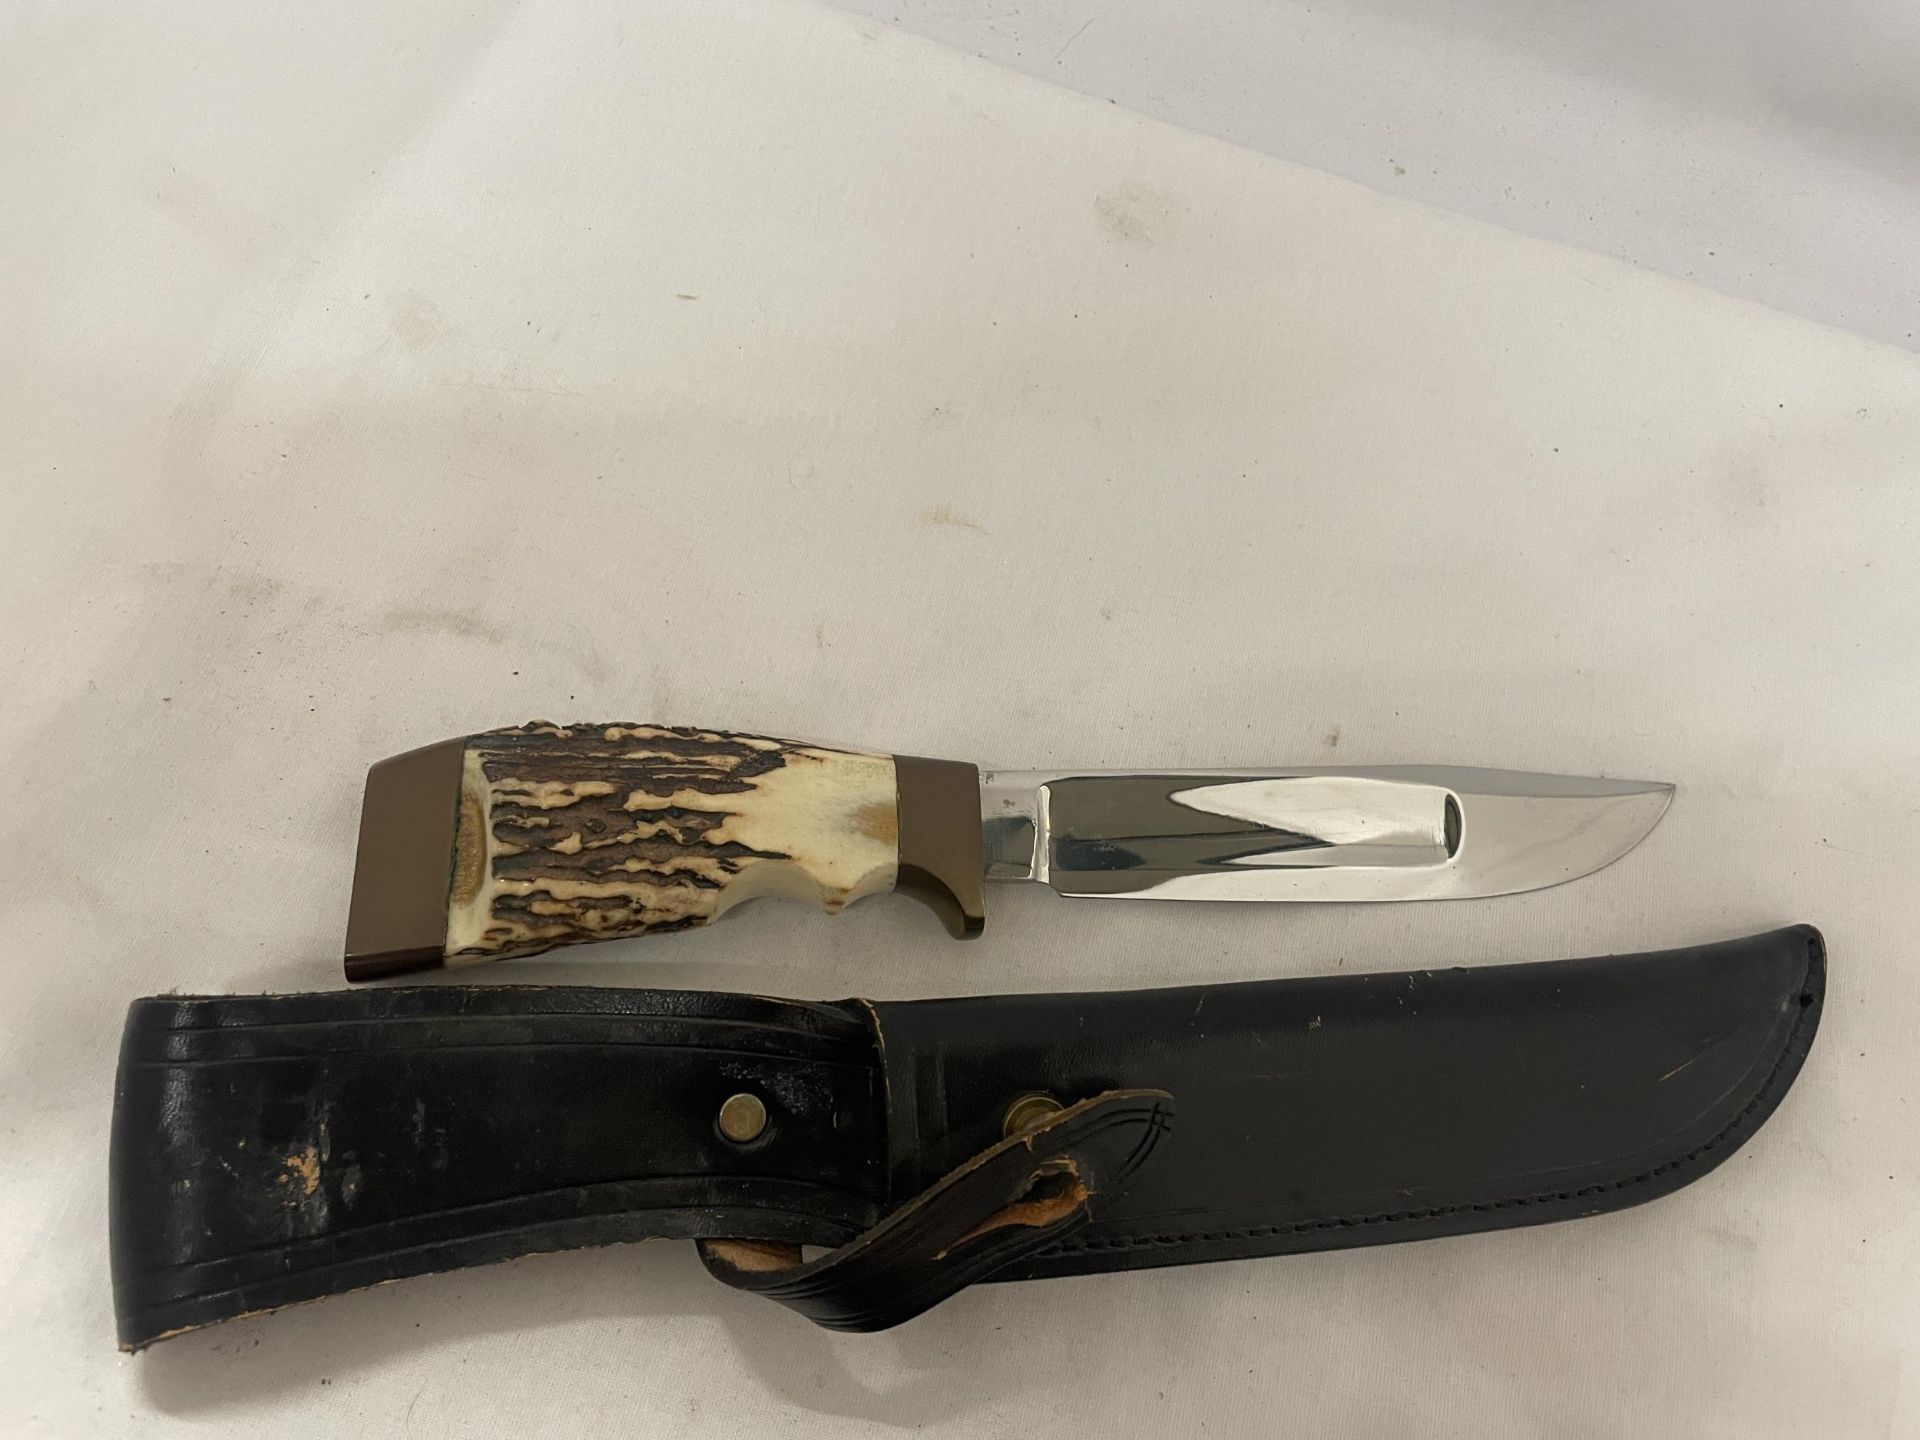 TWO CASED KNIVES TO INCLUDE A BONE HANDLED HUNTING KNIFE AND A DECORATIVE STAG DESIGN POCKET KNIFE - Image 2 of 4